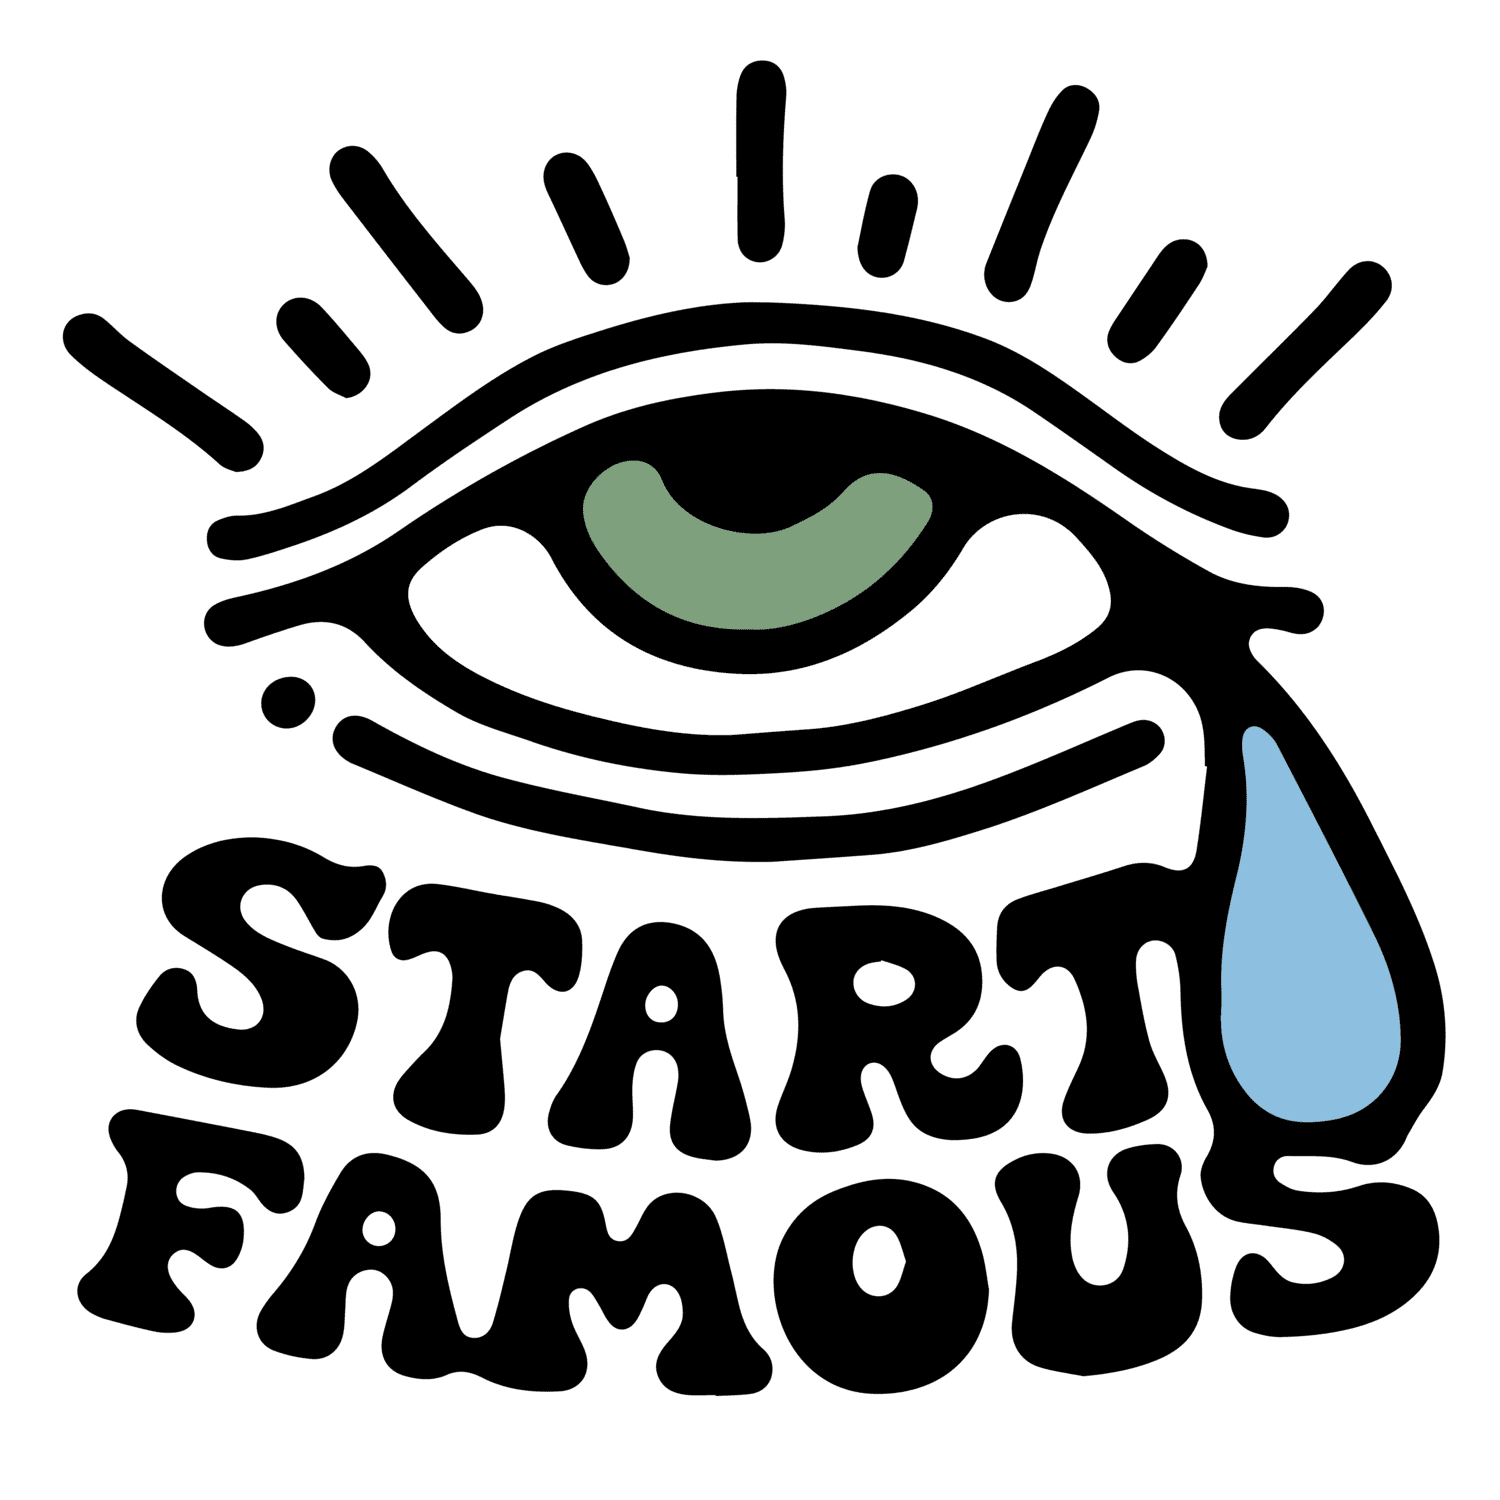 Start Famous logo with an illustration of an eye shedding a tear